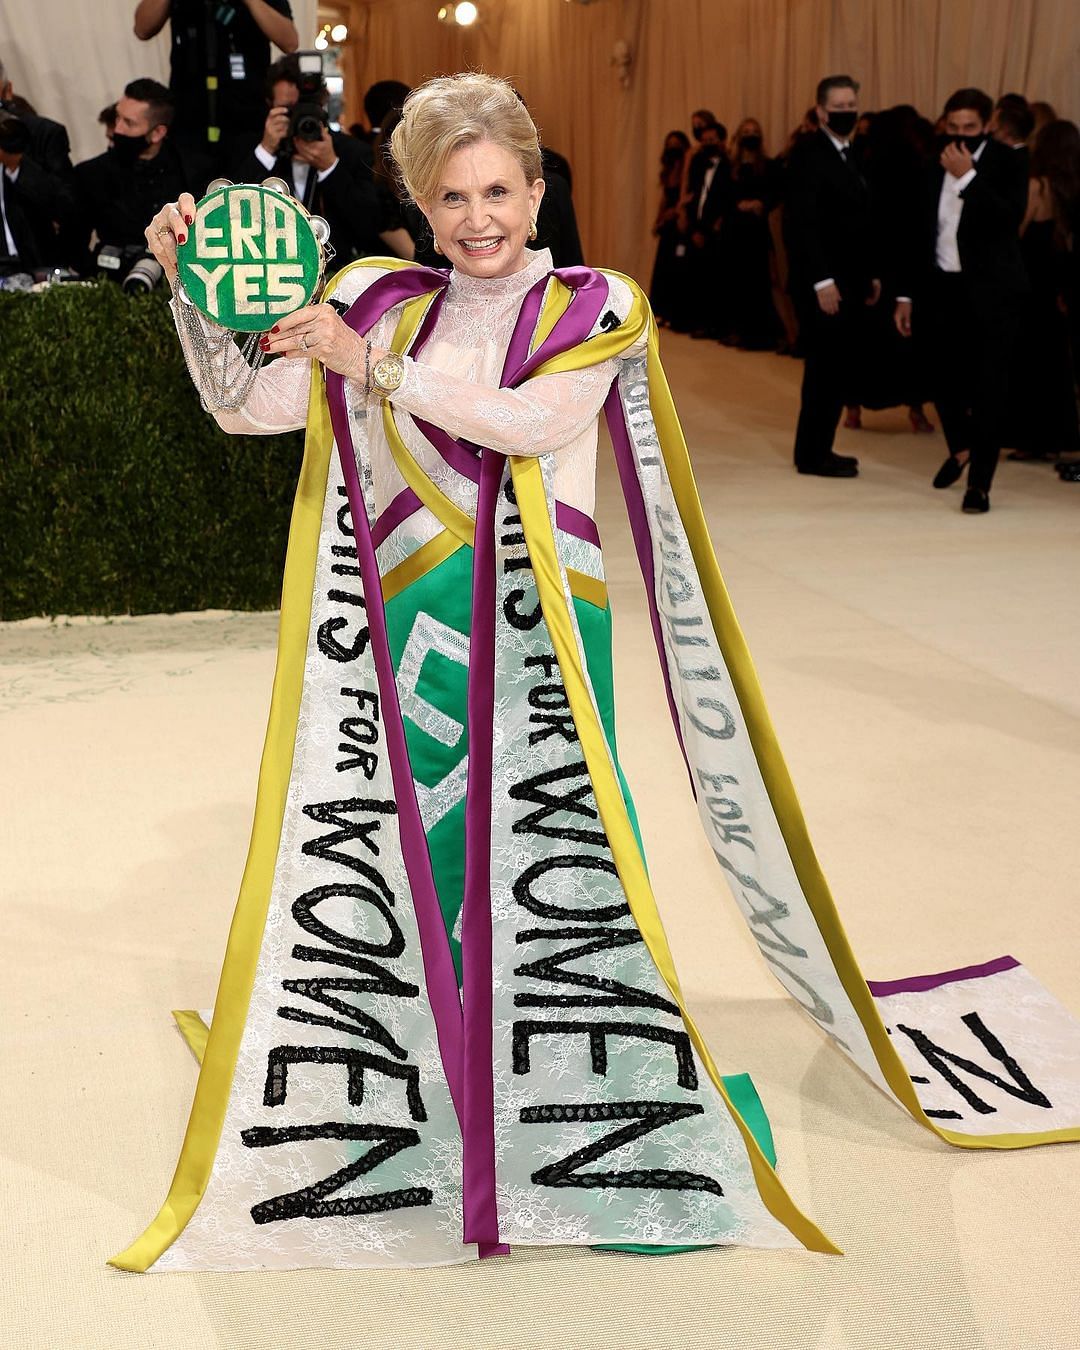 The theme for this year's Met Gala is In America: A Lexicon of Fashion.